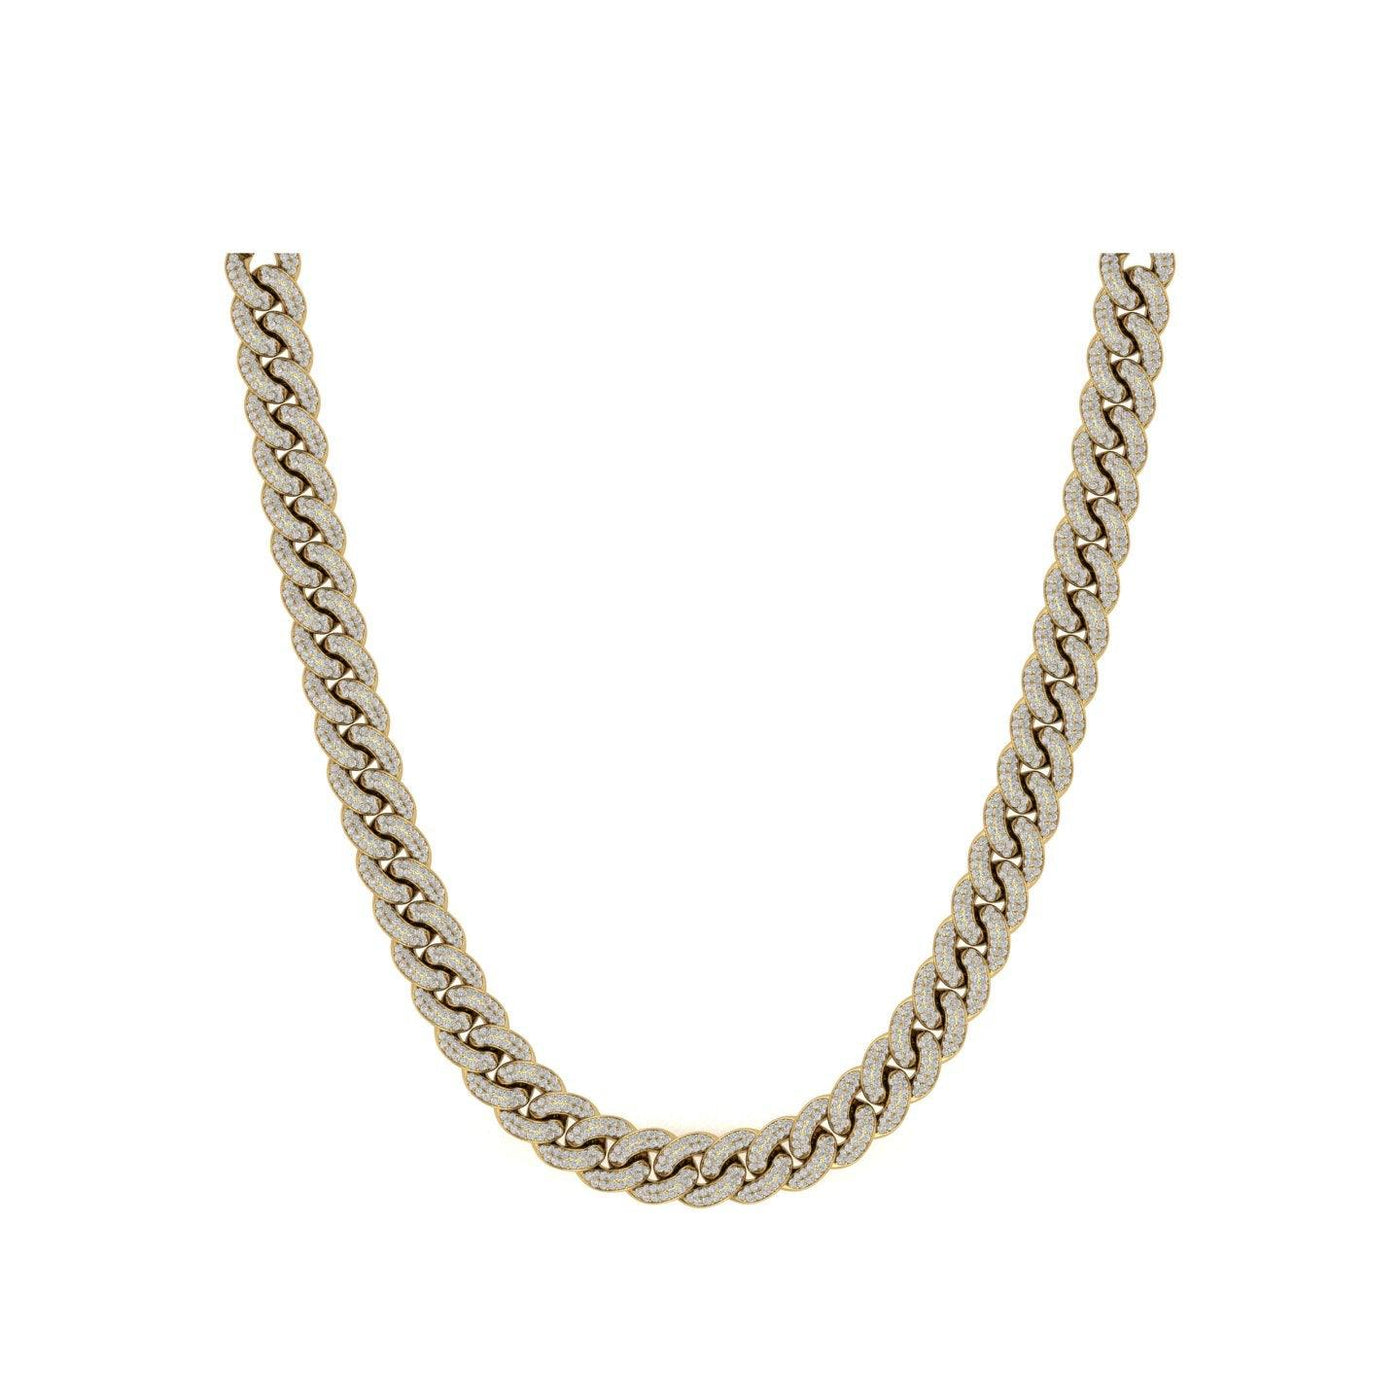 Gold Color 9mm Cuban Chain Made of 925 Sterling Silver Material